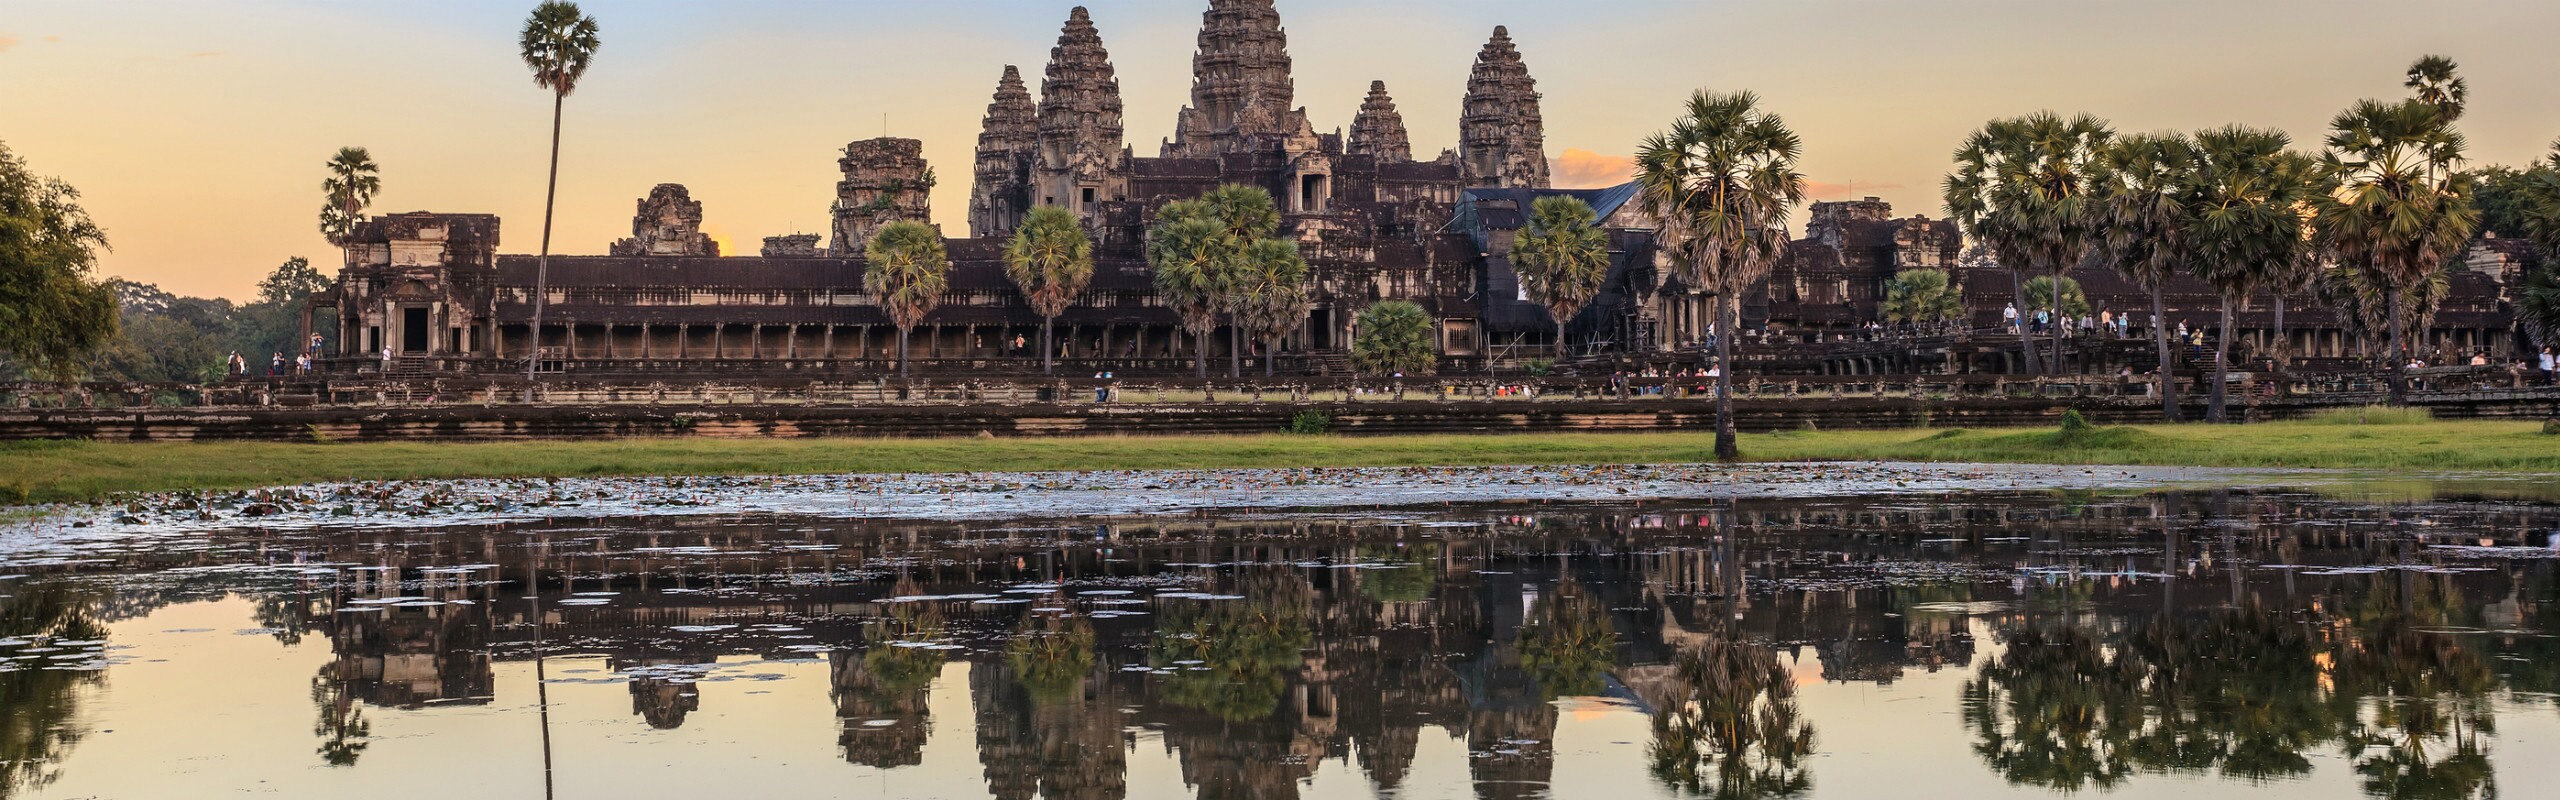 Top Things to Do and See in Angkor Wat